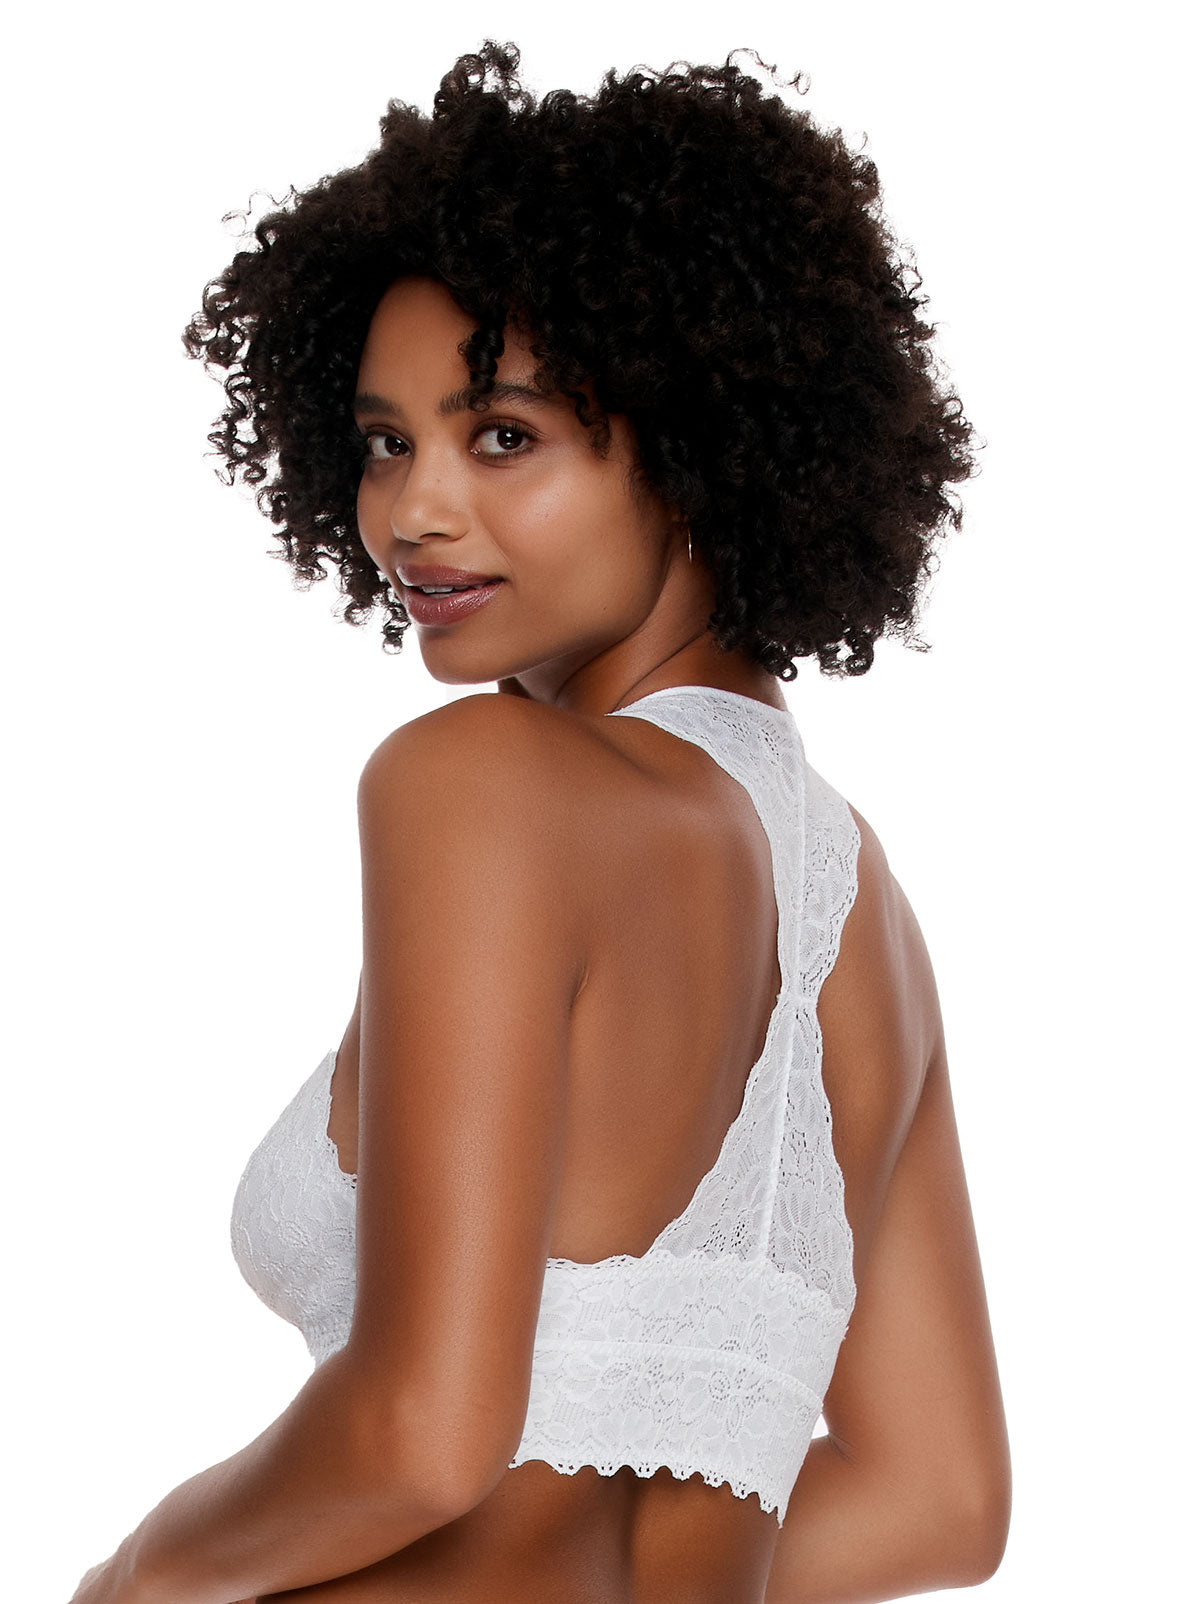 Felina Finesse Cami Bralette - Stretchy Lace Bralettes For Women - Sexy and  Comfortable - Inclusive Sizing, From Small To Plus Size. (Cyclamen, L-XL)